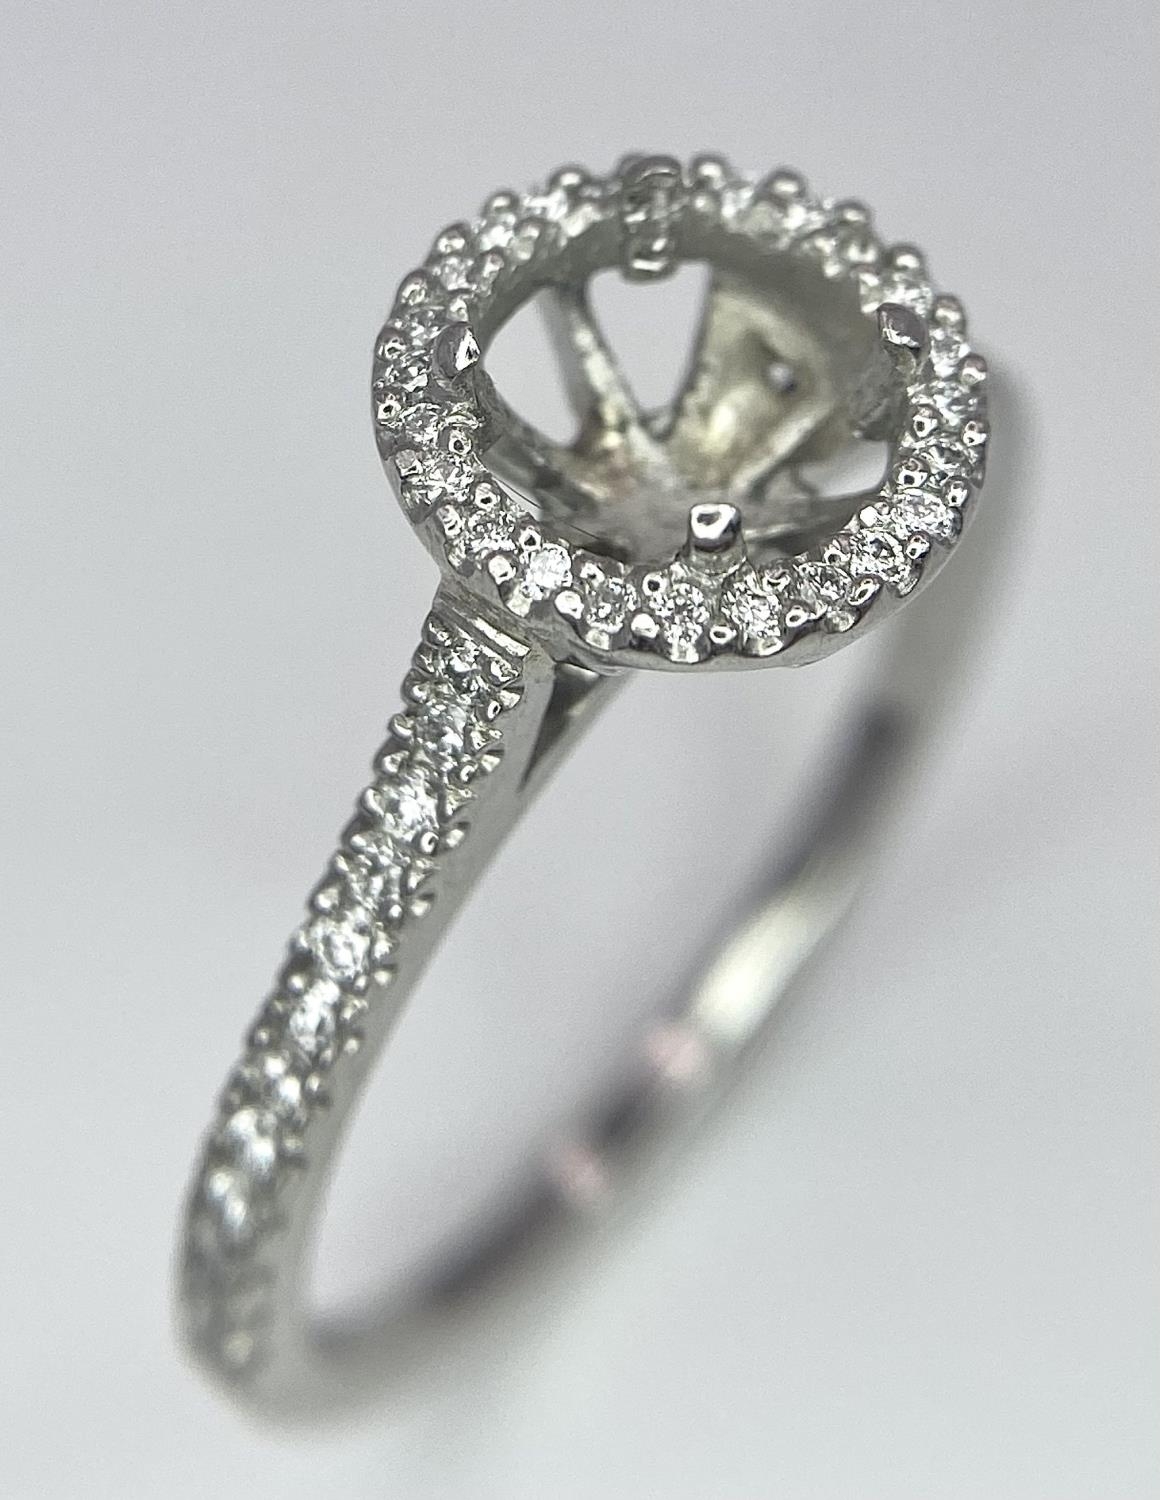 A PLATINUM DIAMOND SET HALO AND SHOULDERS RING MOUNT 0.40CT, READY TO SET YOUR DREAM GEMSTONE 4.3G - Image 2 of 6